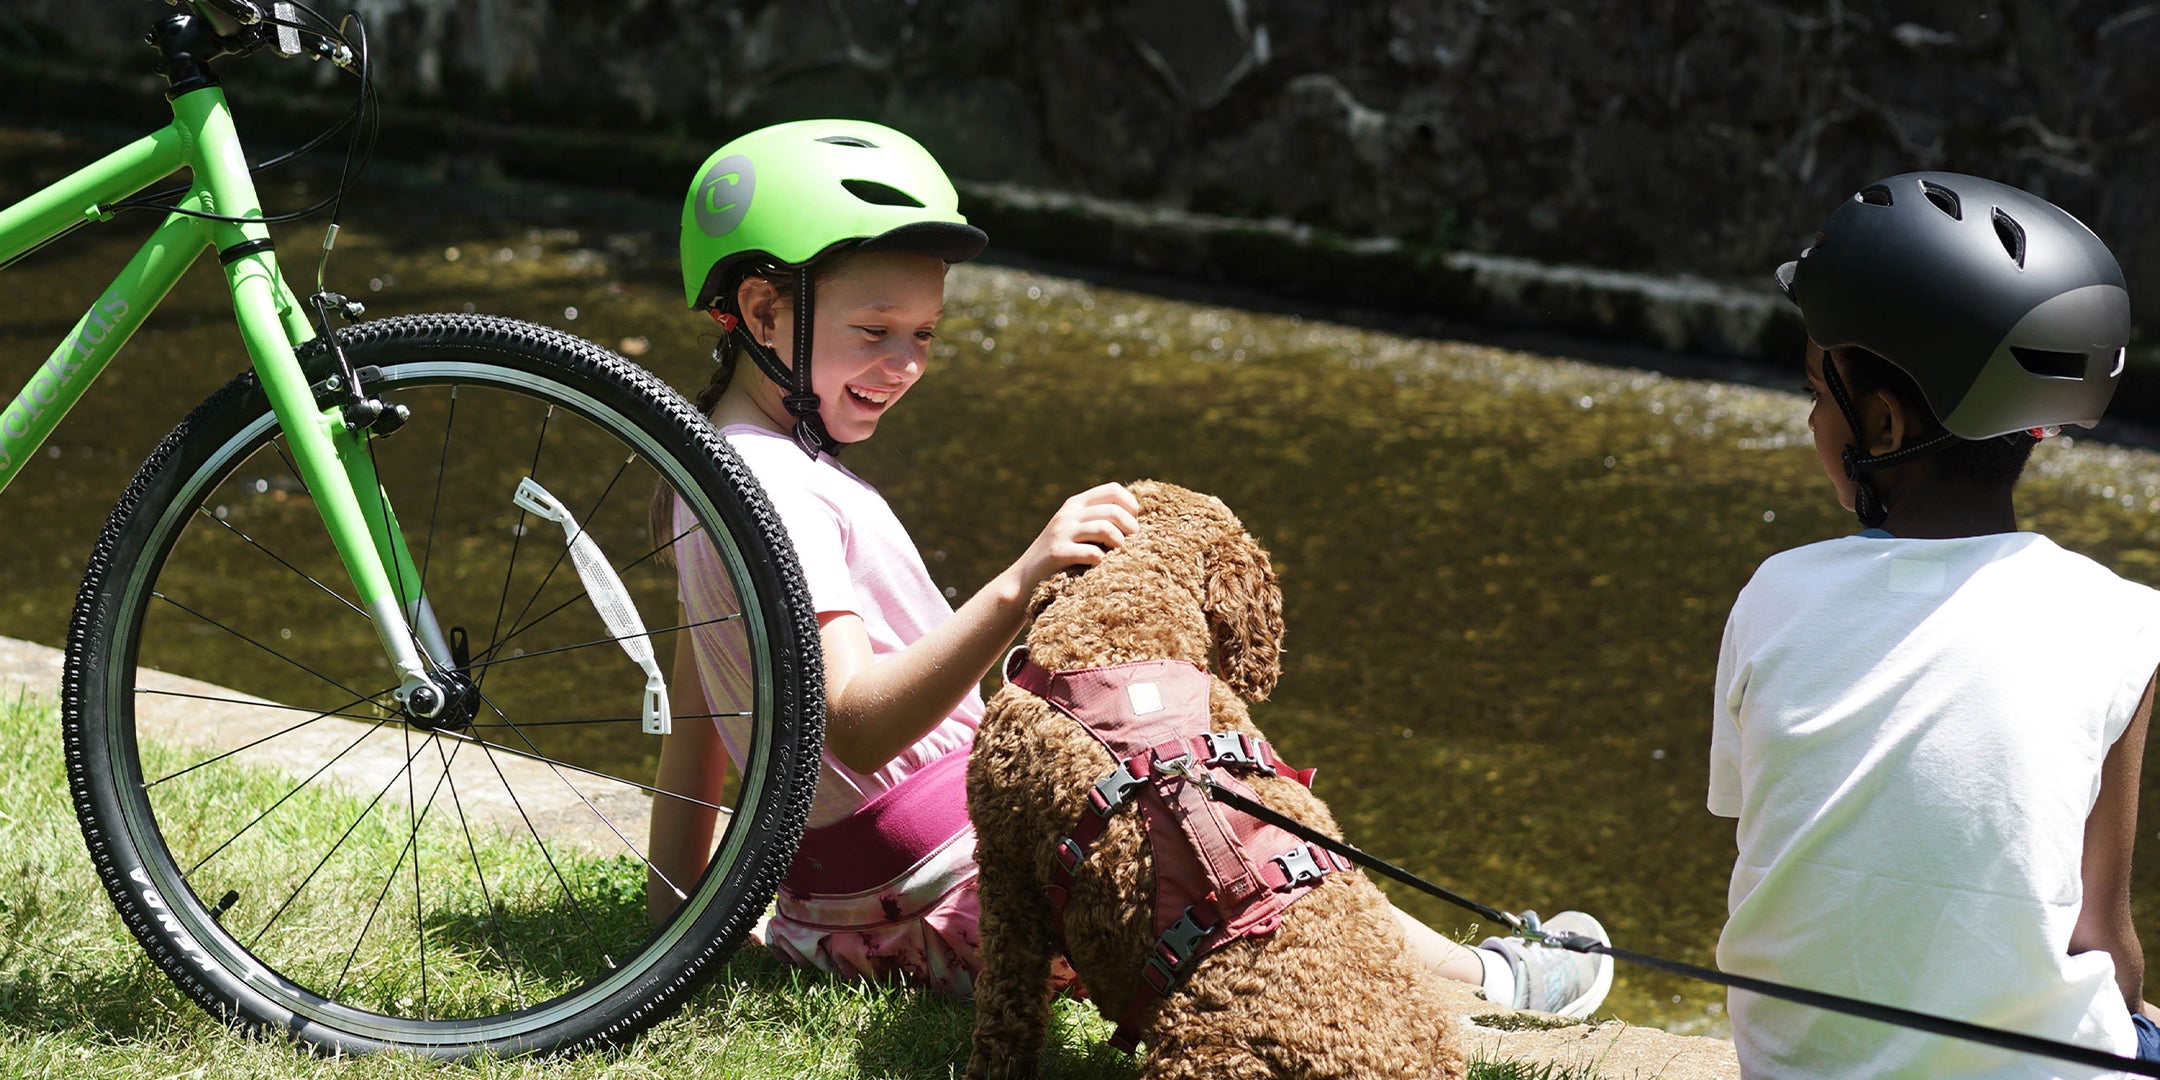 Little girl with a green CYCLEKids helmet petting a dog, sitting next to a little boy with a black CYCLEKids Helmet next to a river